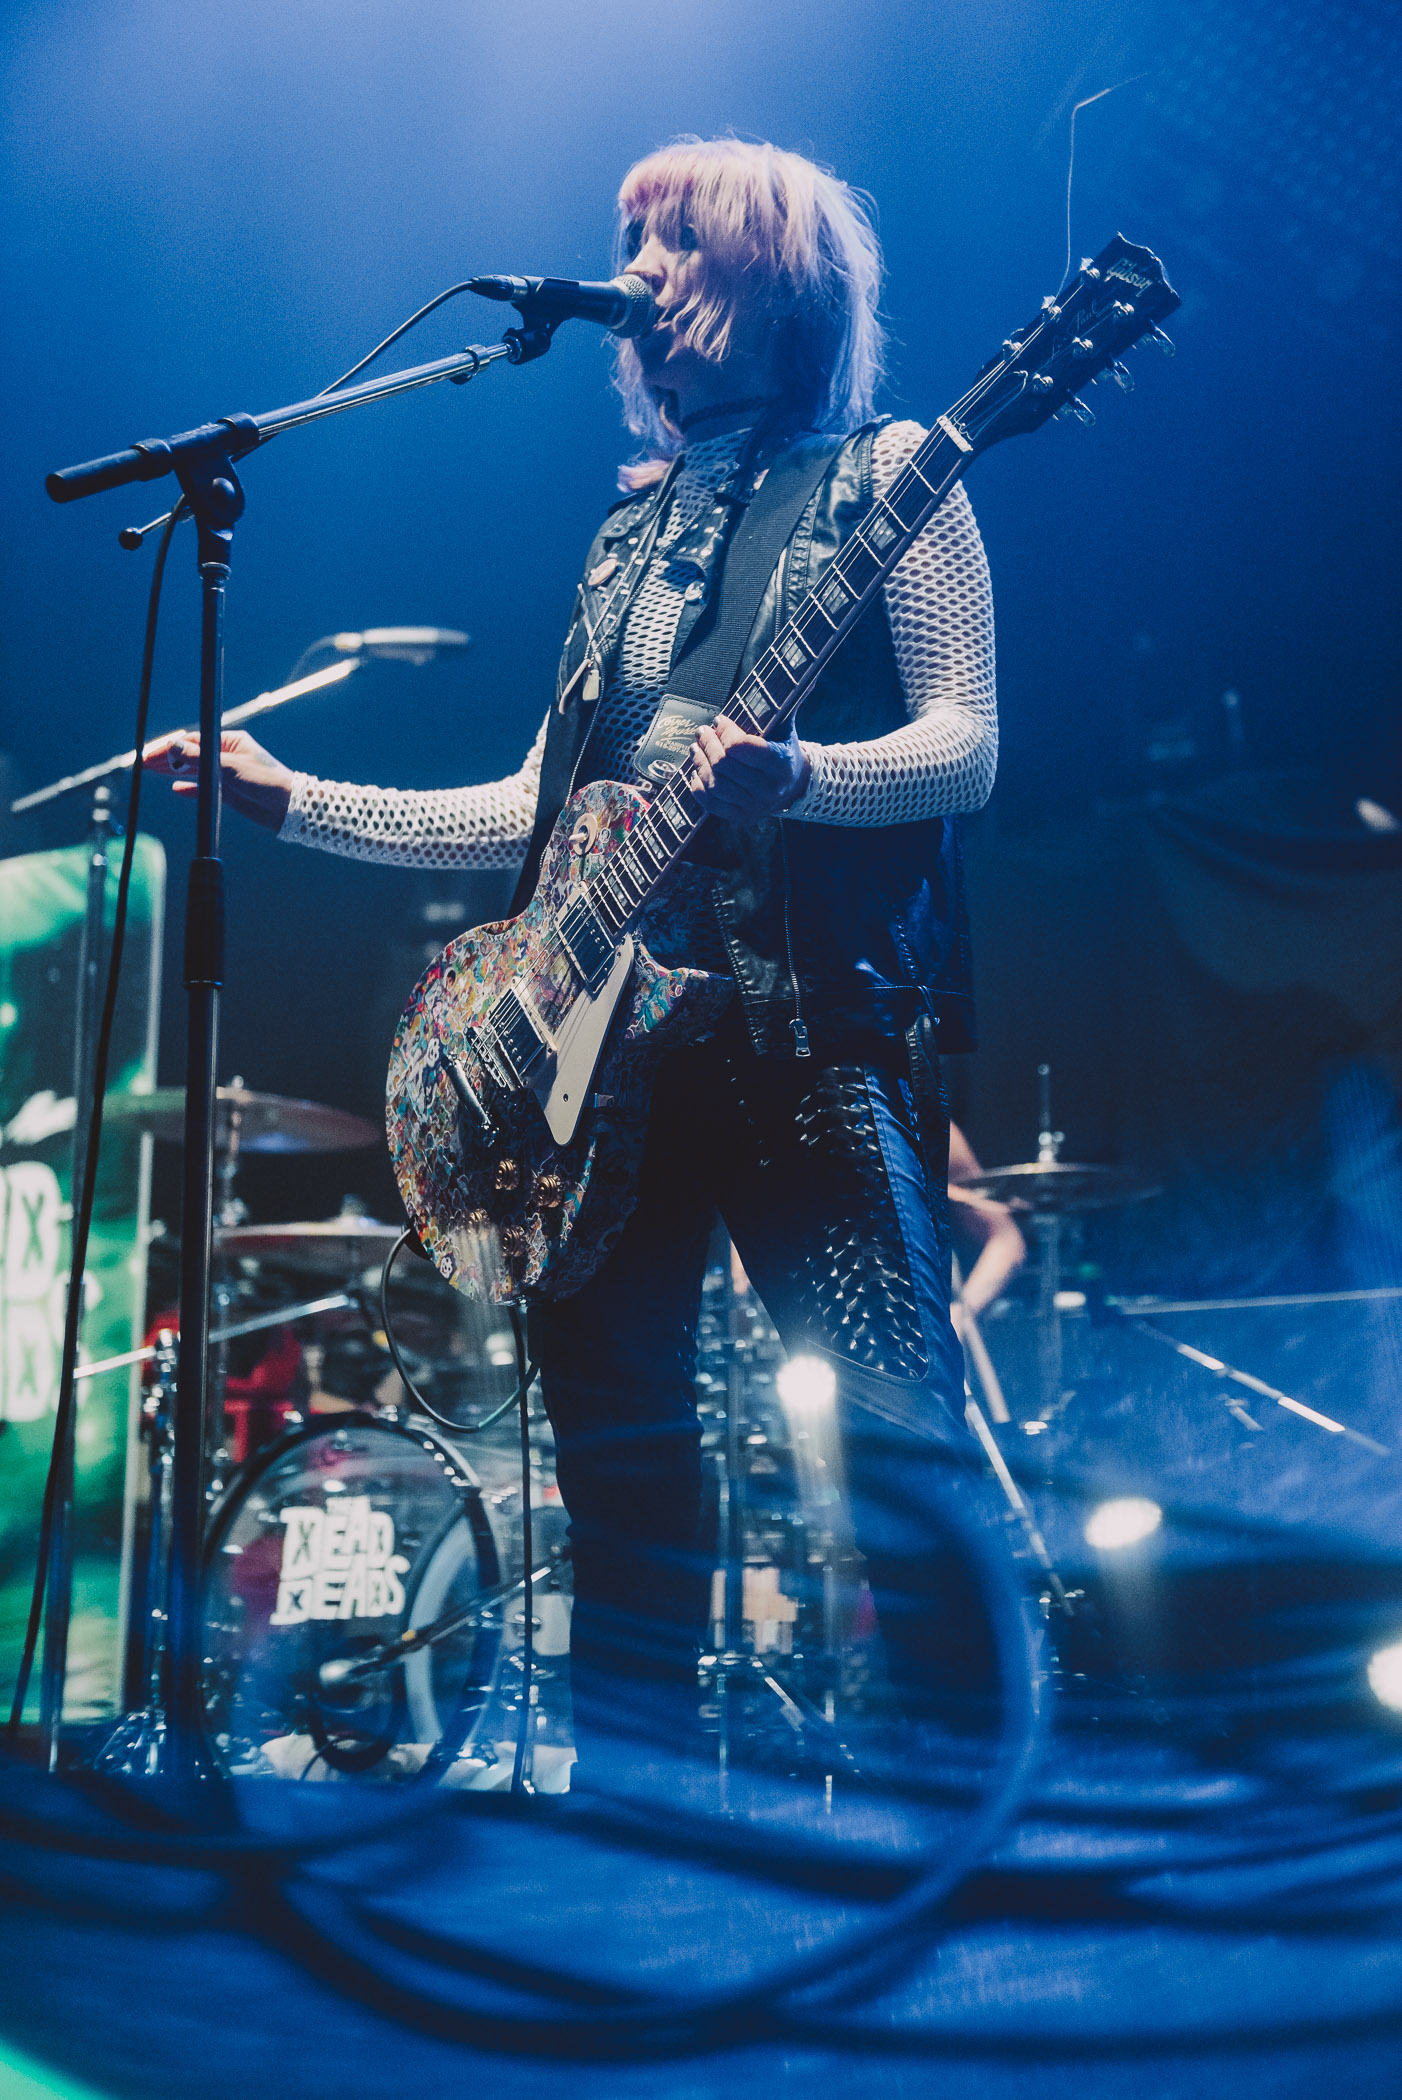 3_The_Dead_Deads-Abbotsford_Centre-Timothy_Nguyen-20180127 (5 of 15).jpg